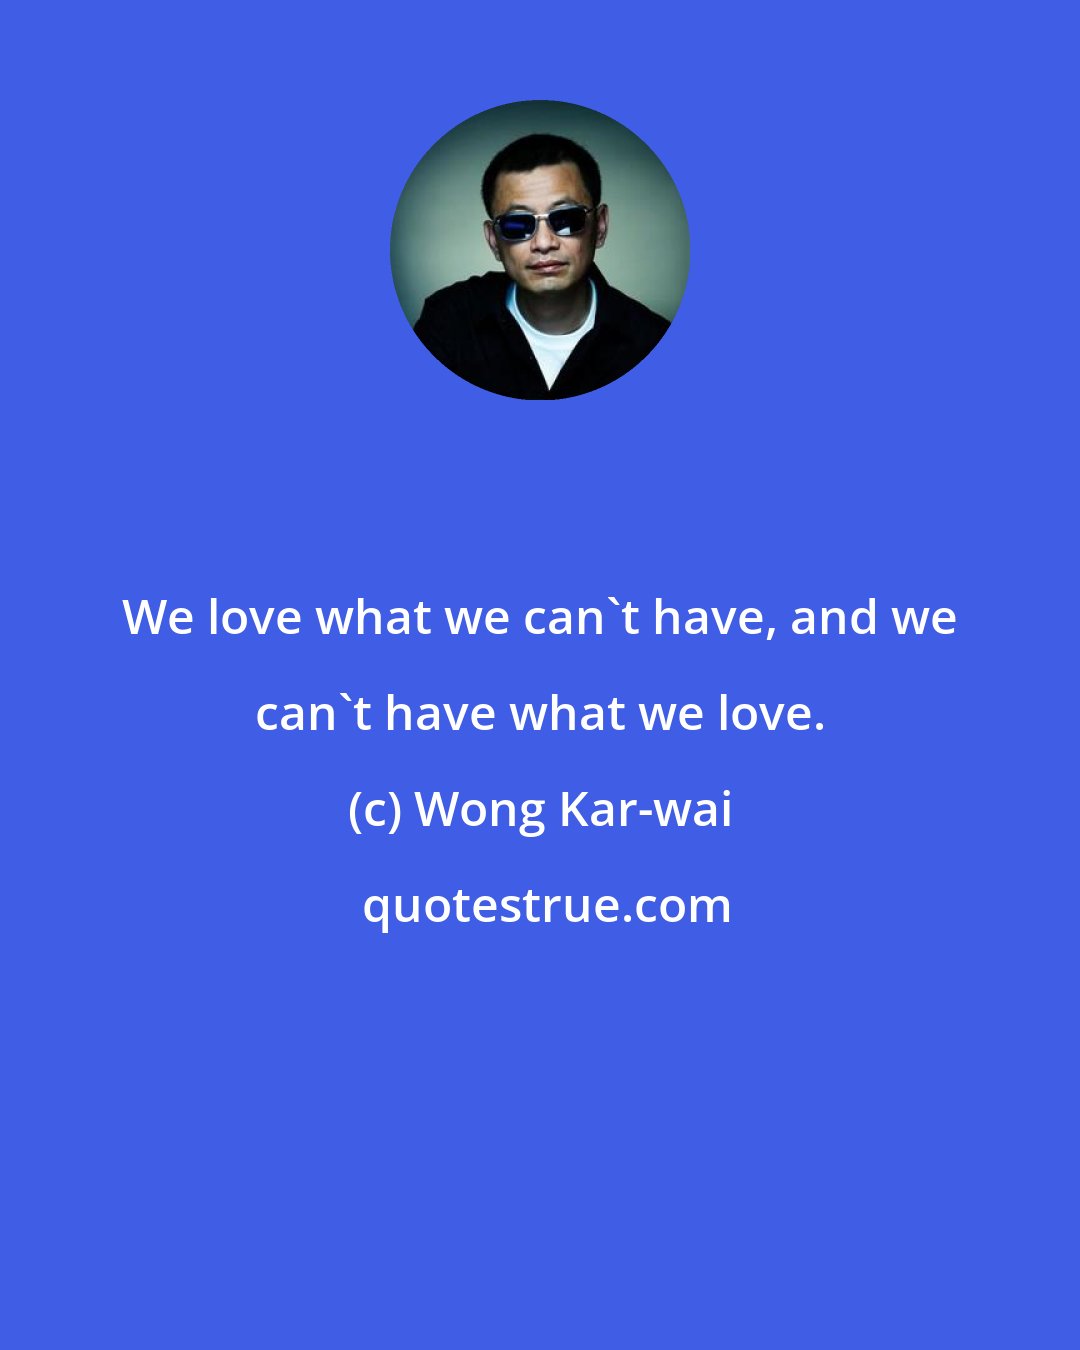 Wong Kar-wai: We love what we can't have, and we can't have what we love.